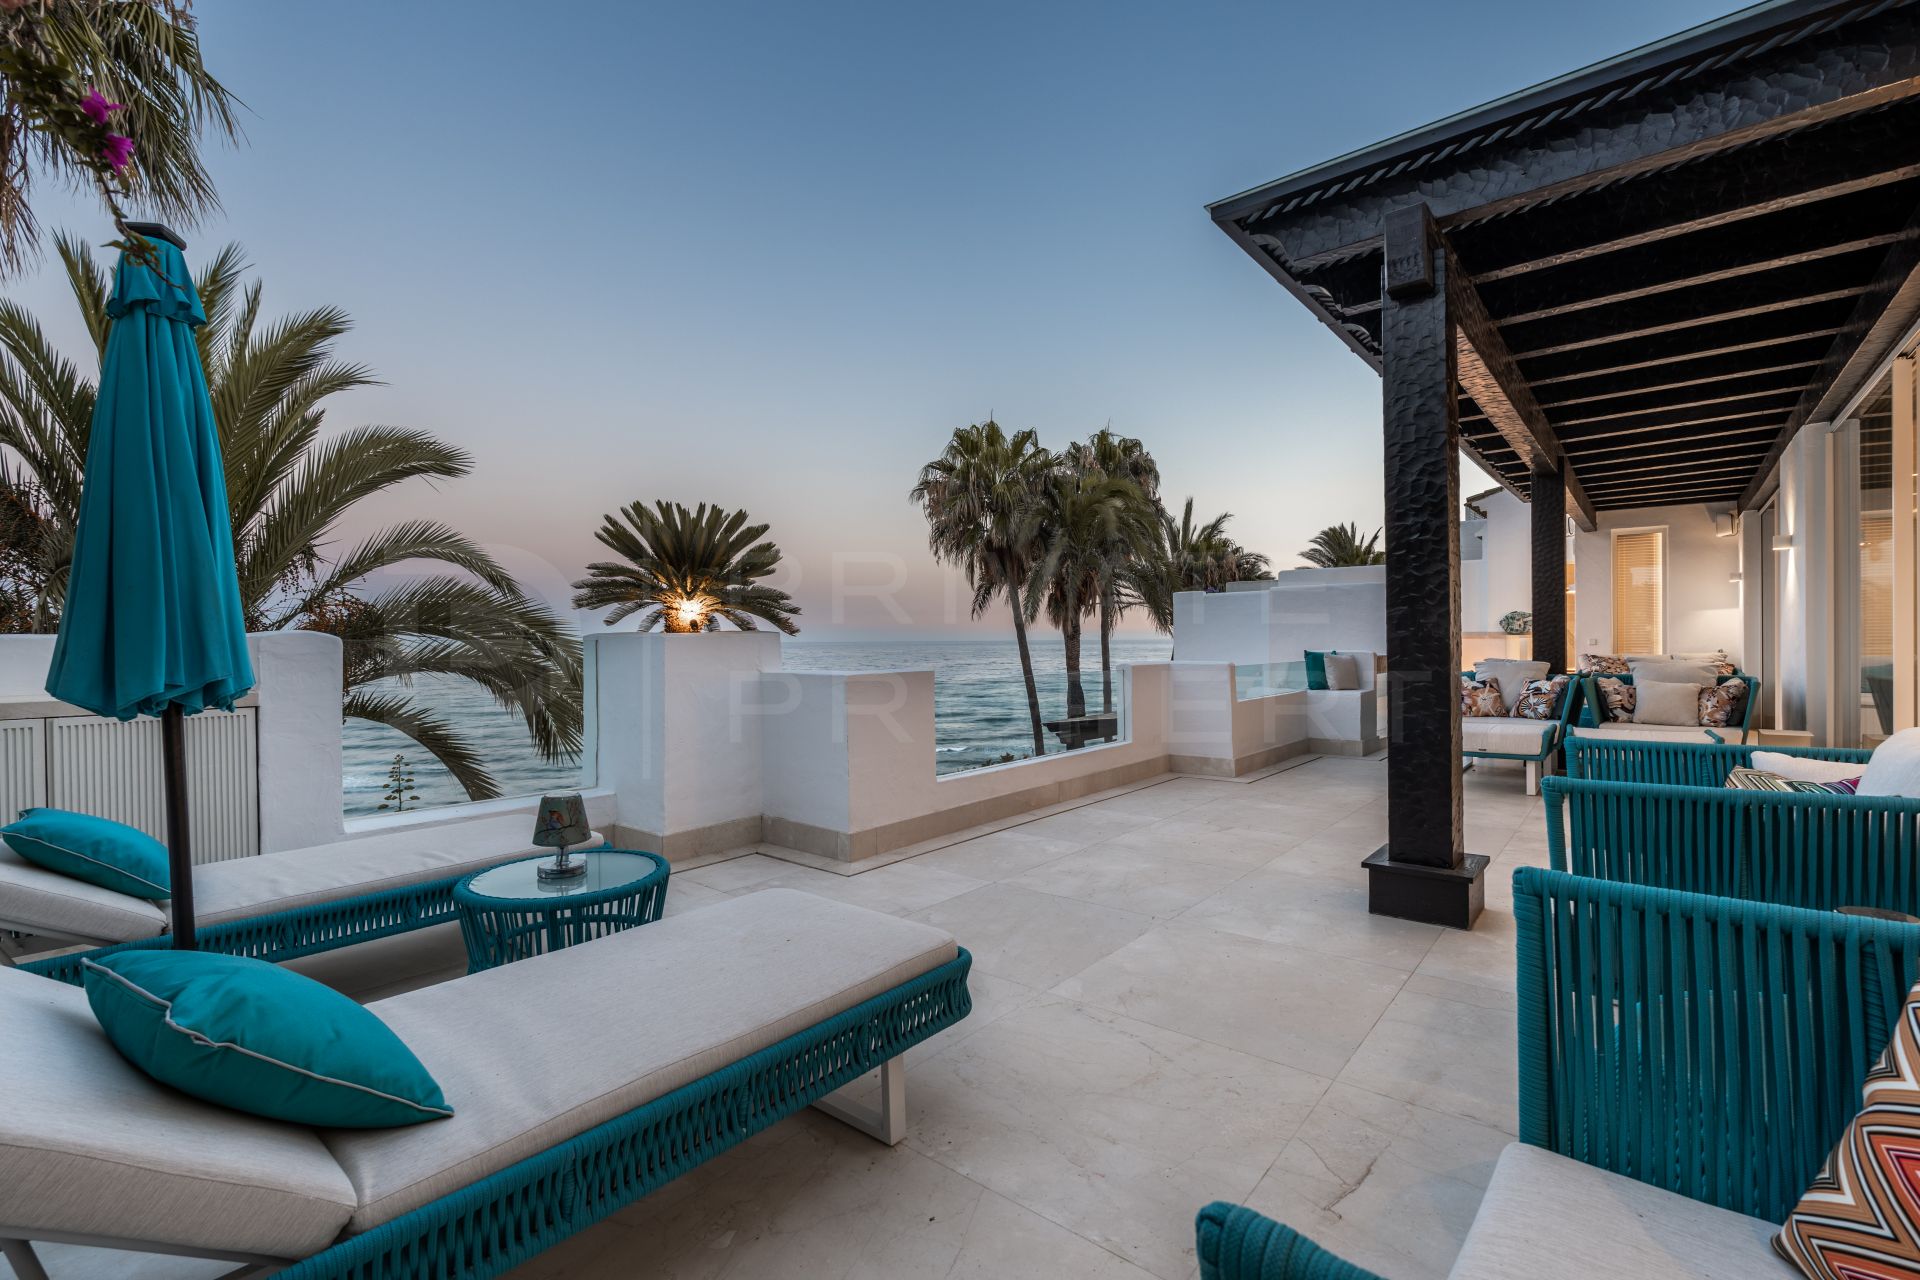 One-of-a-kind frontline beach property in Puente Romano